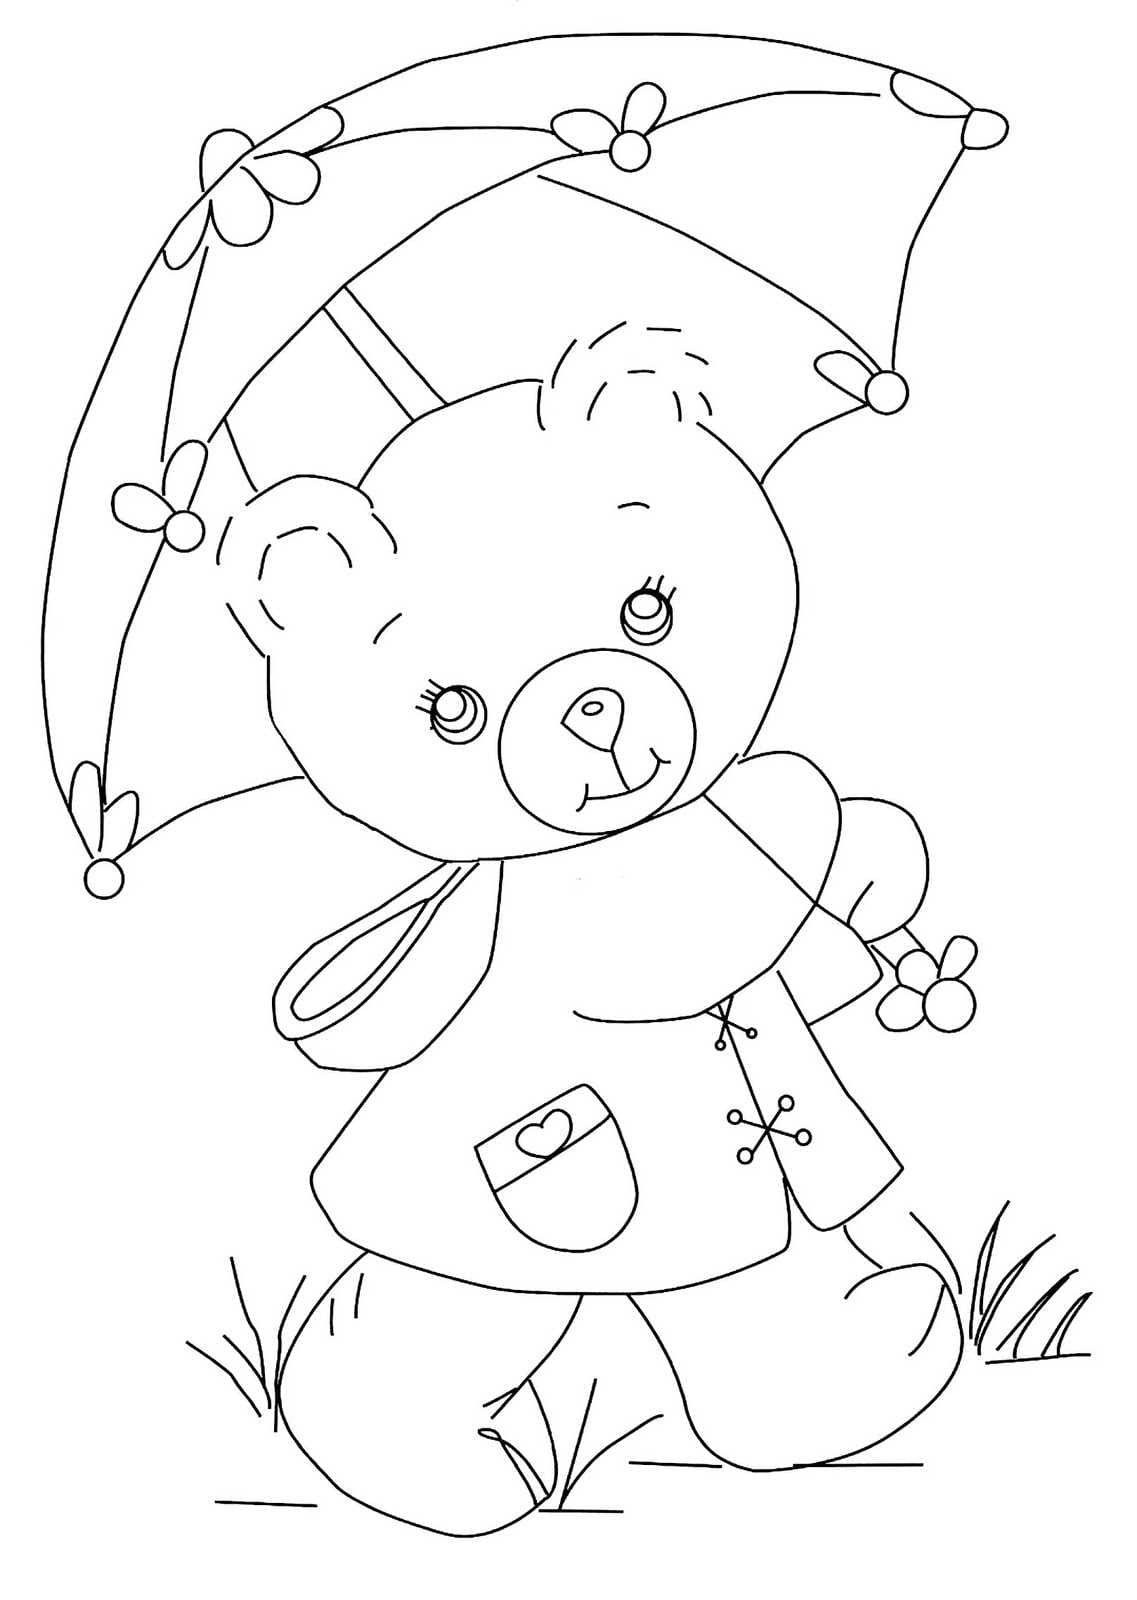 Coloring page Teddy Bears Teddy bear with umbrella